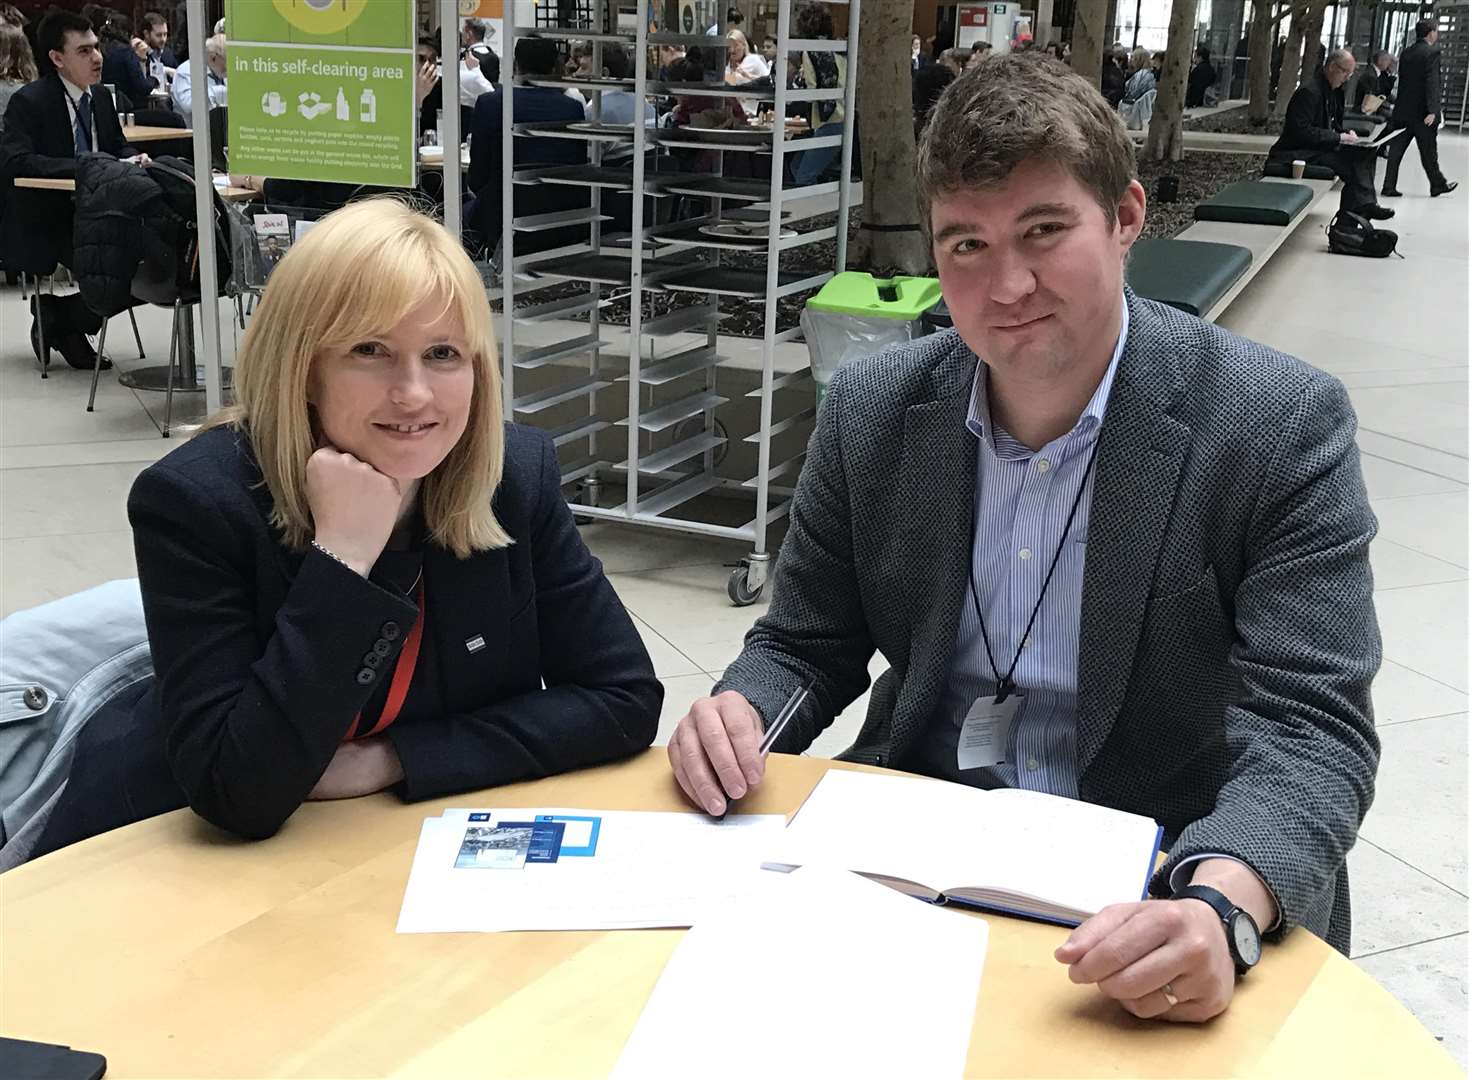 MP Rosie Duffield with Southeastern manager Chris Vinson, at Portcullis House, Westminster (1910752)